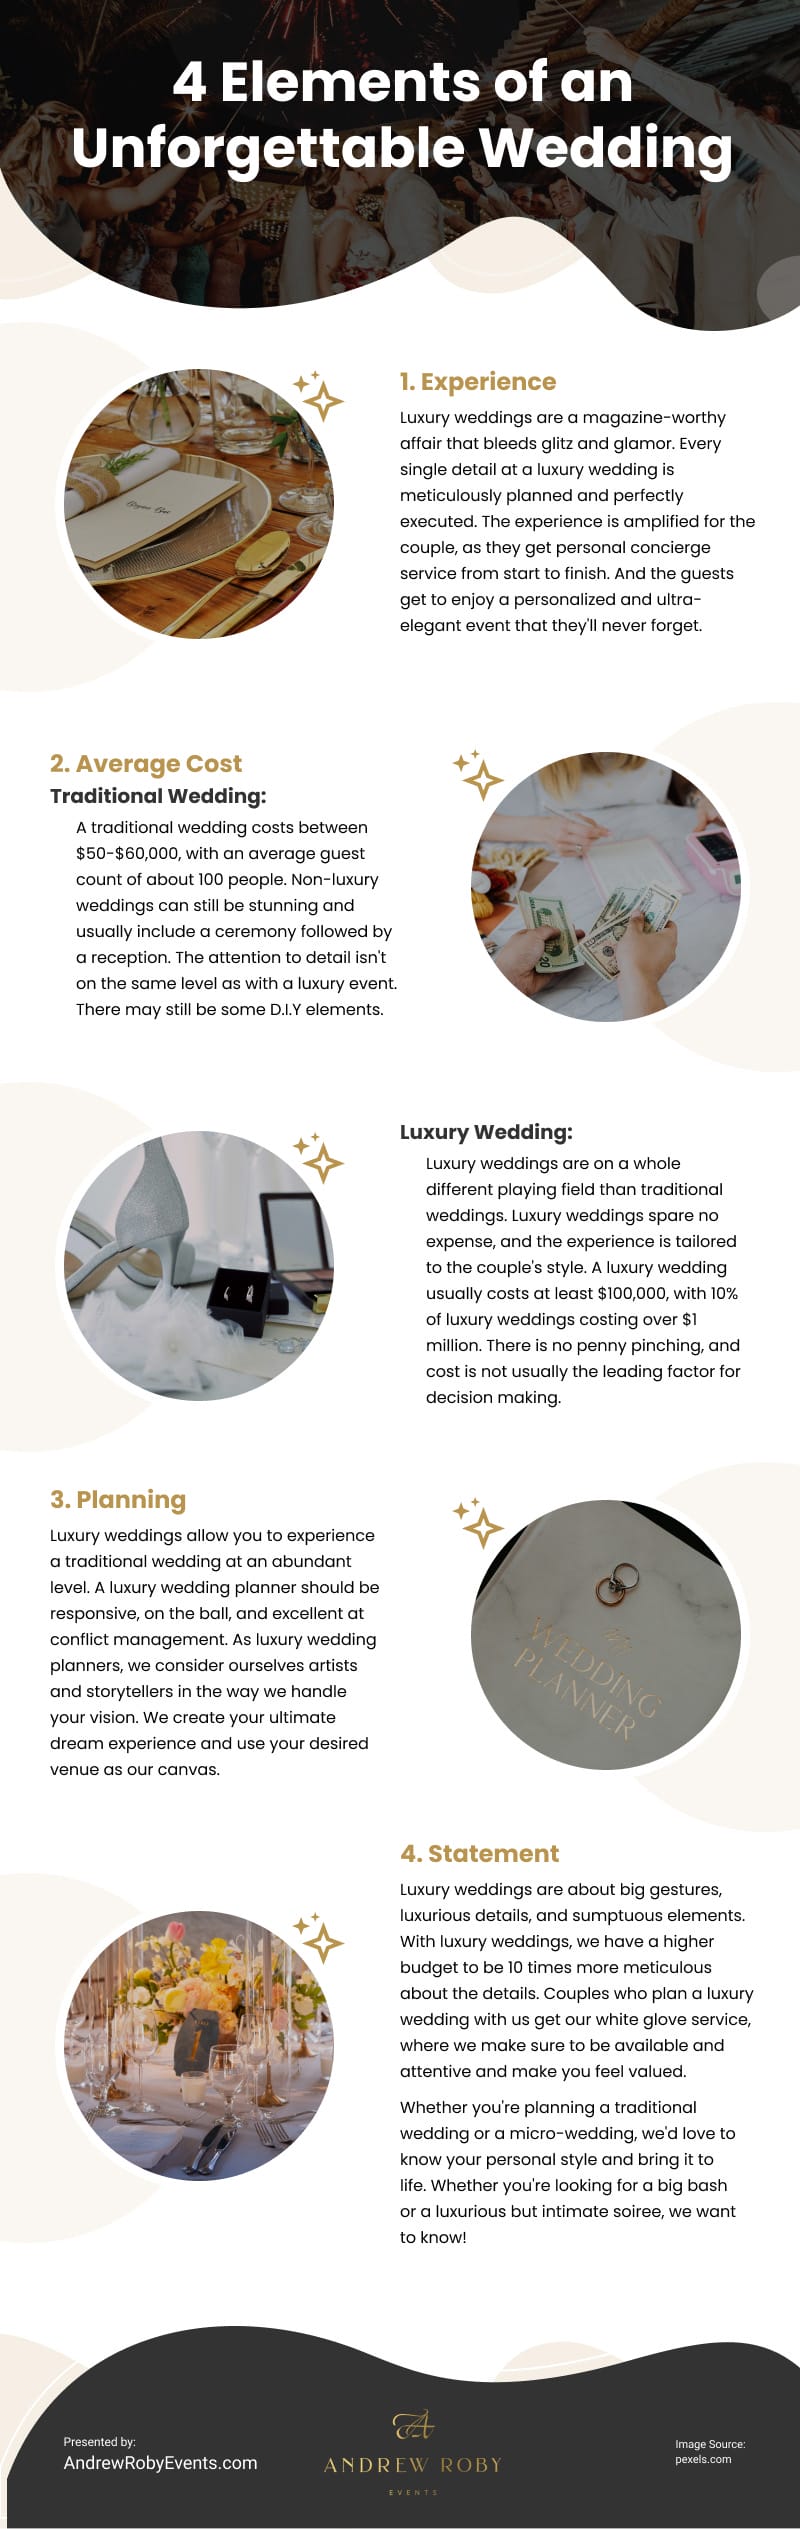 4 Elements of an Unforgettable Wedding Infographic